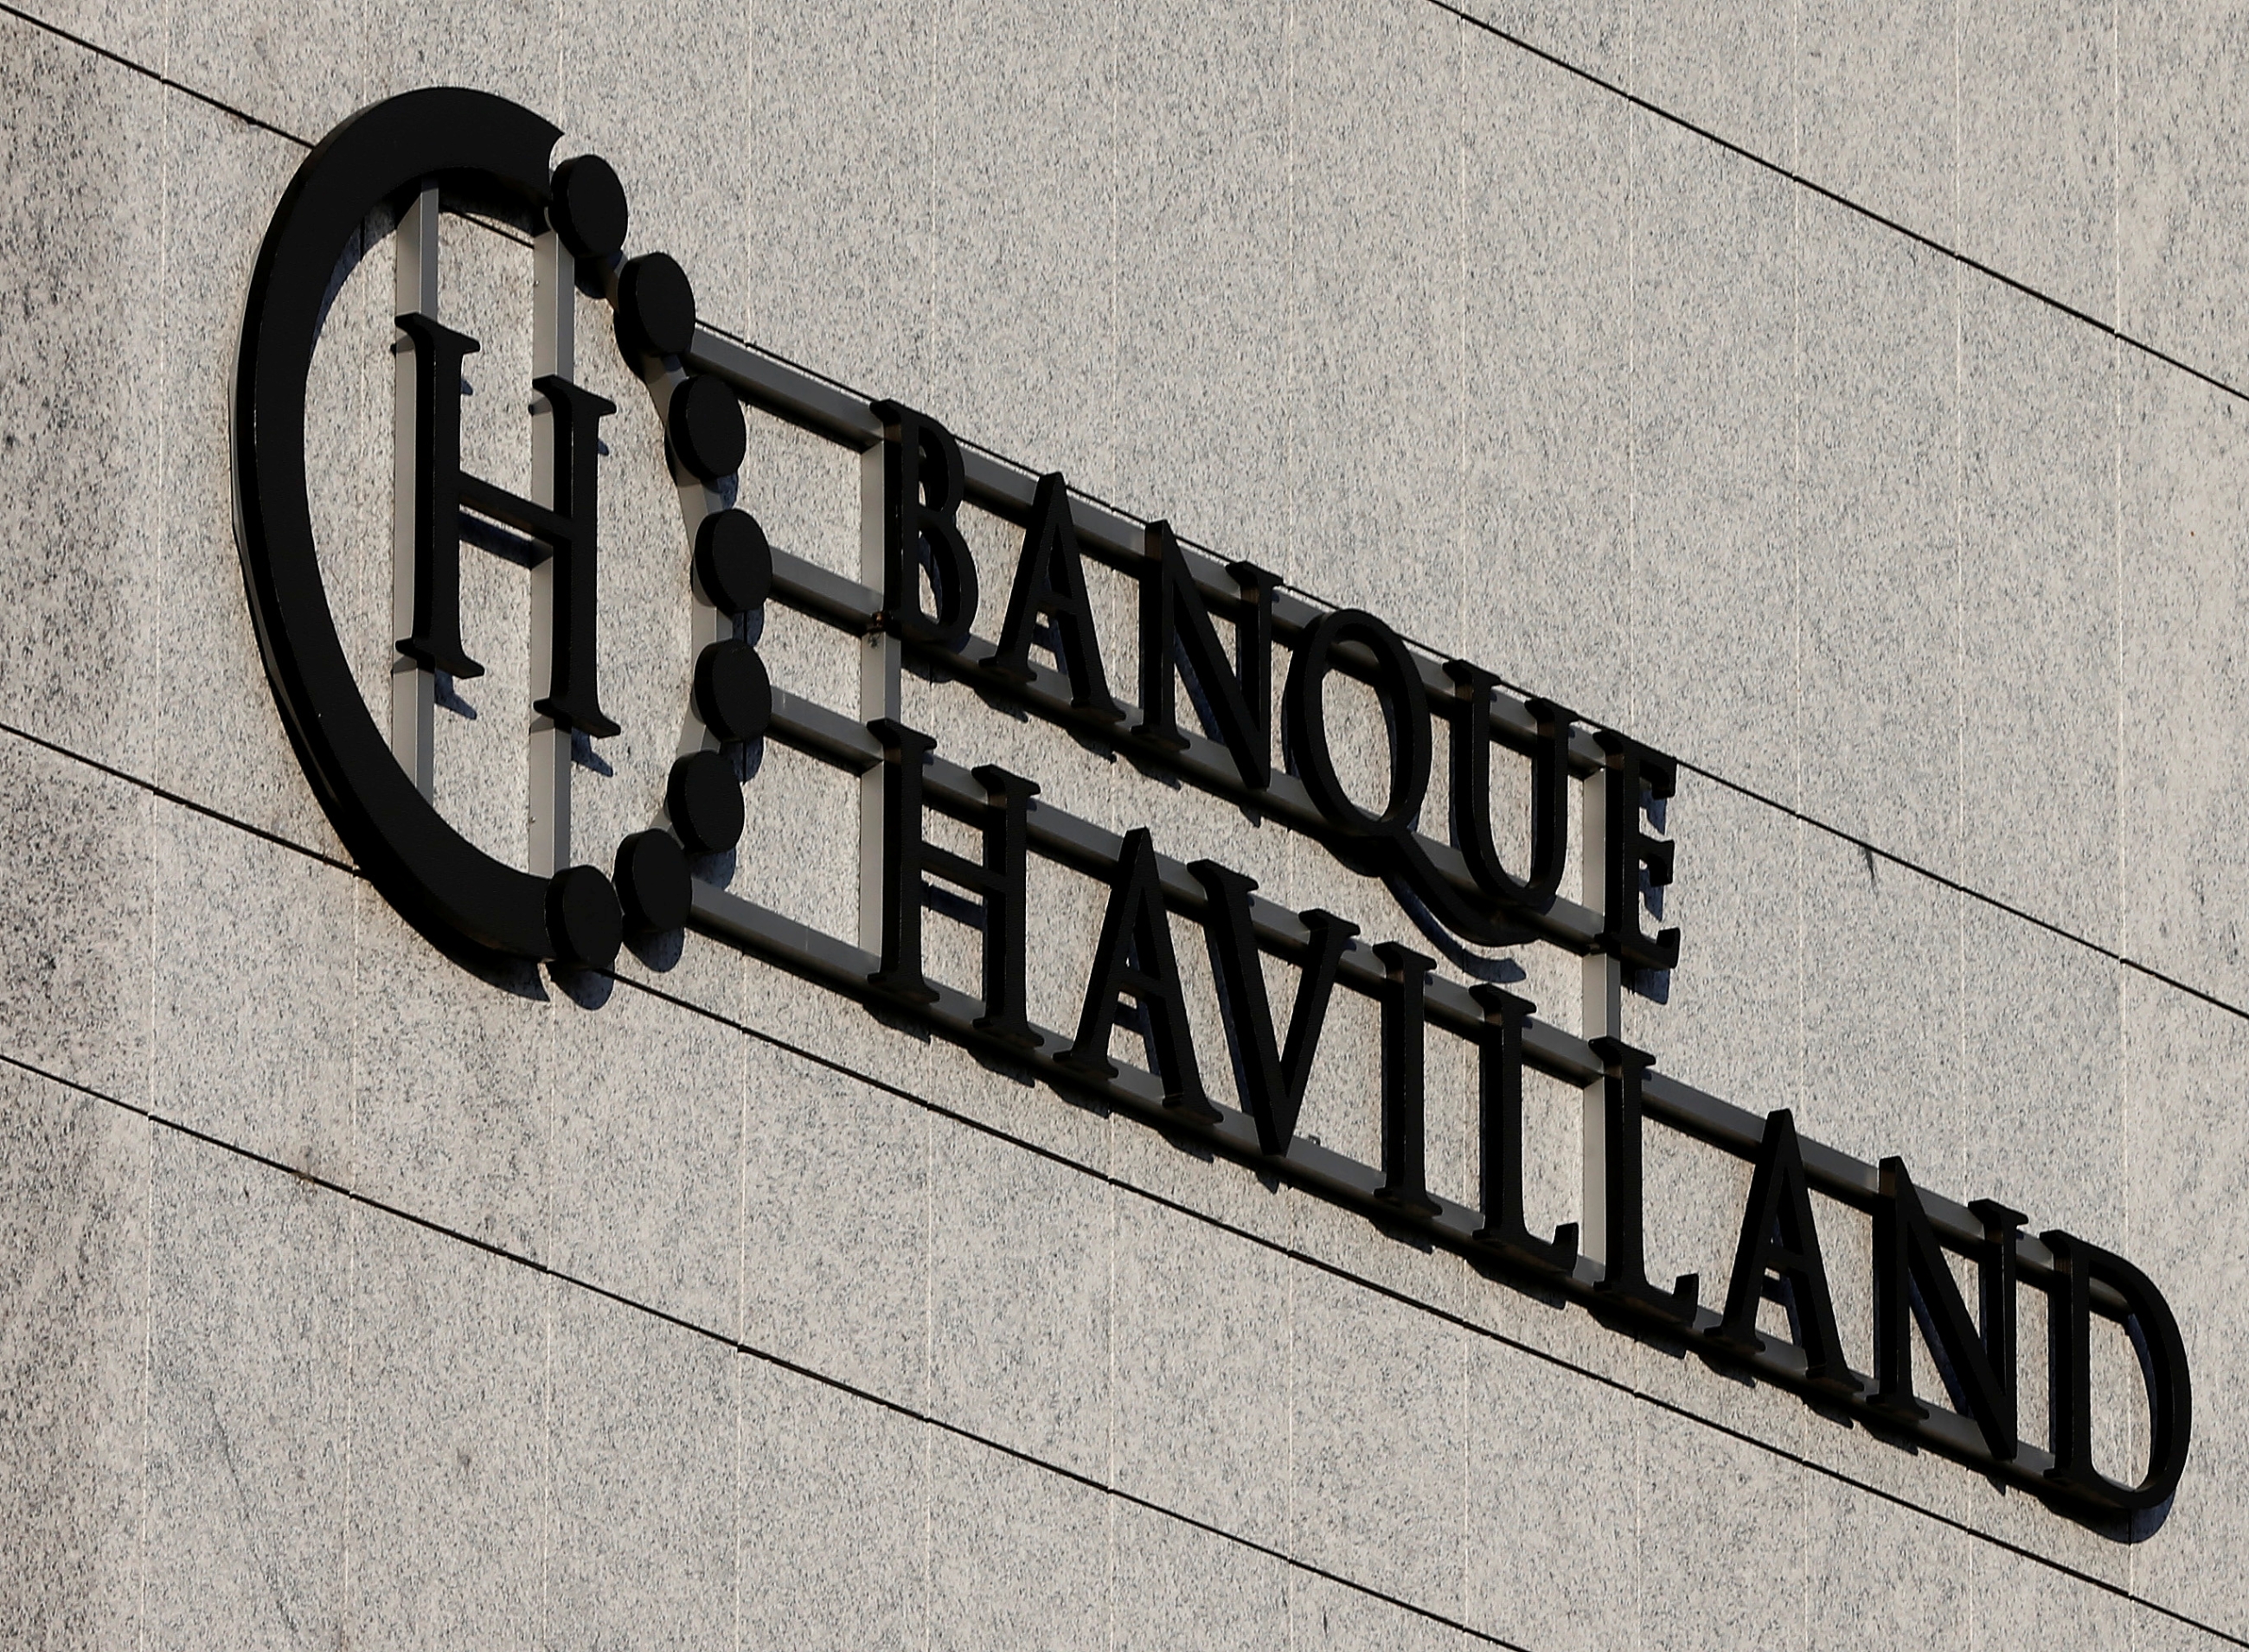 Qatar took Banque Havilland to court in London, accusing it of orchestrating an currency manipulation attack that cost the country $40bn to support its currency.